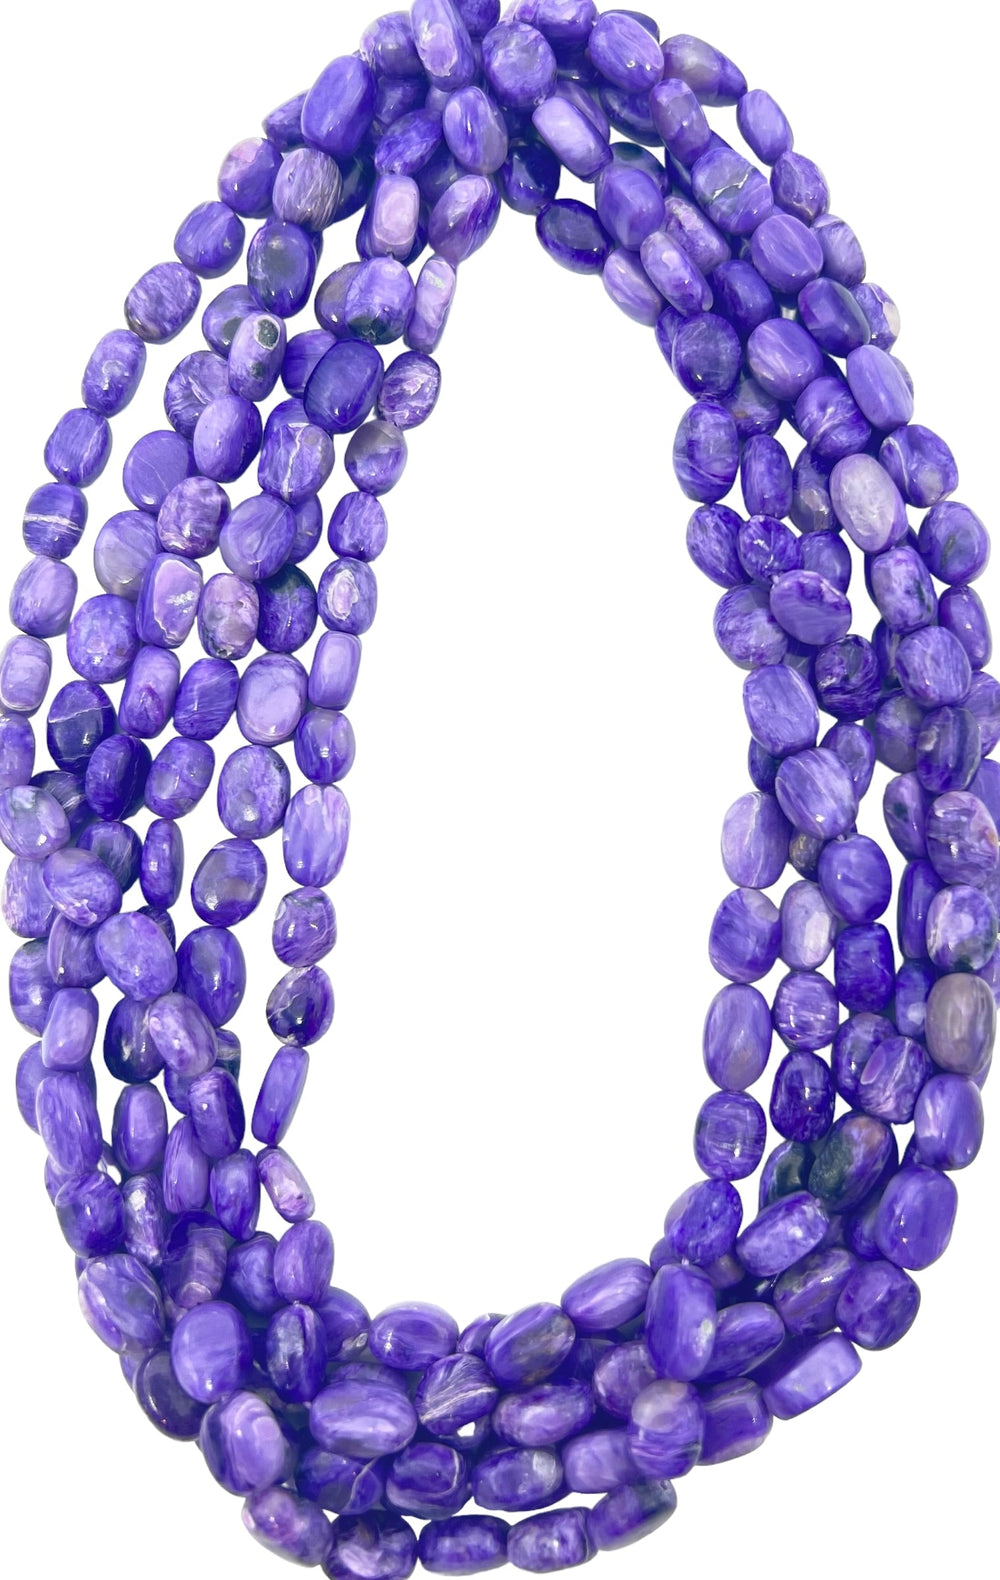 Premium Color Charoite 10x8mm Oval Beads (8 inch Strands)